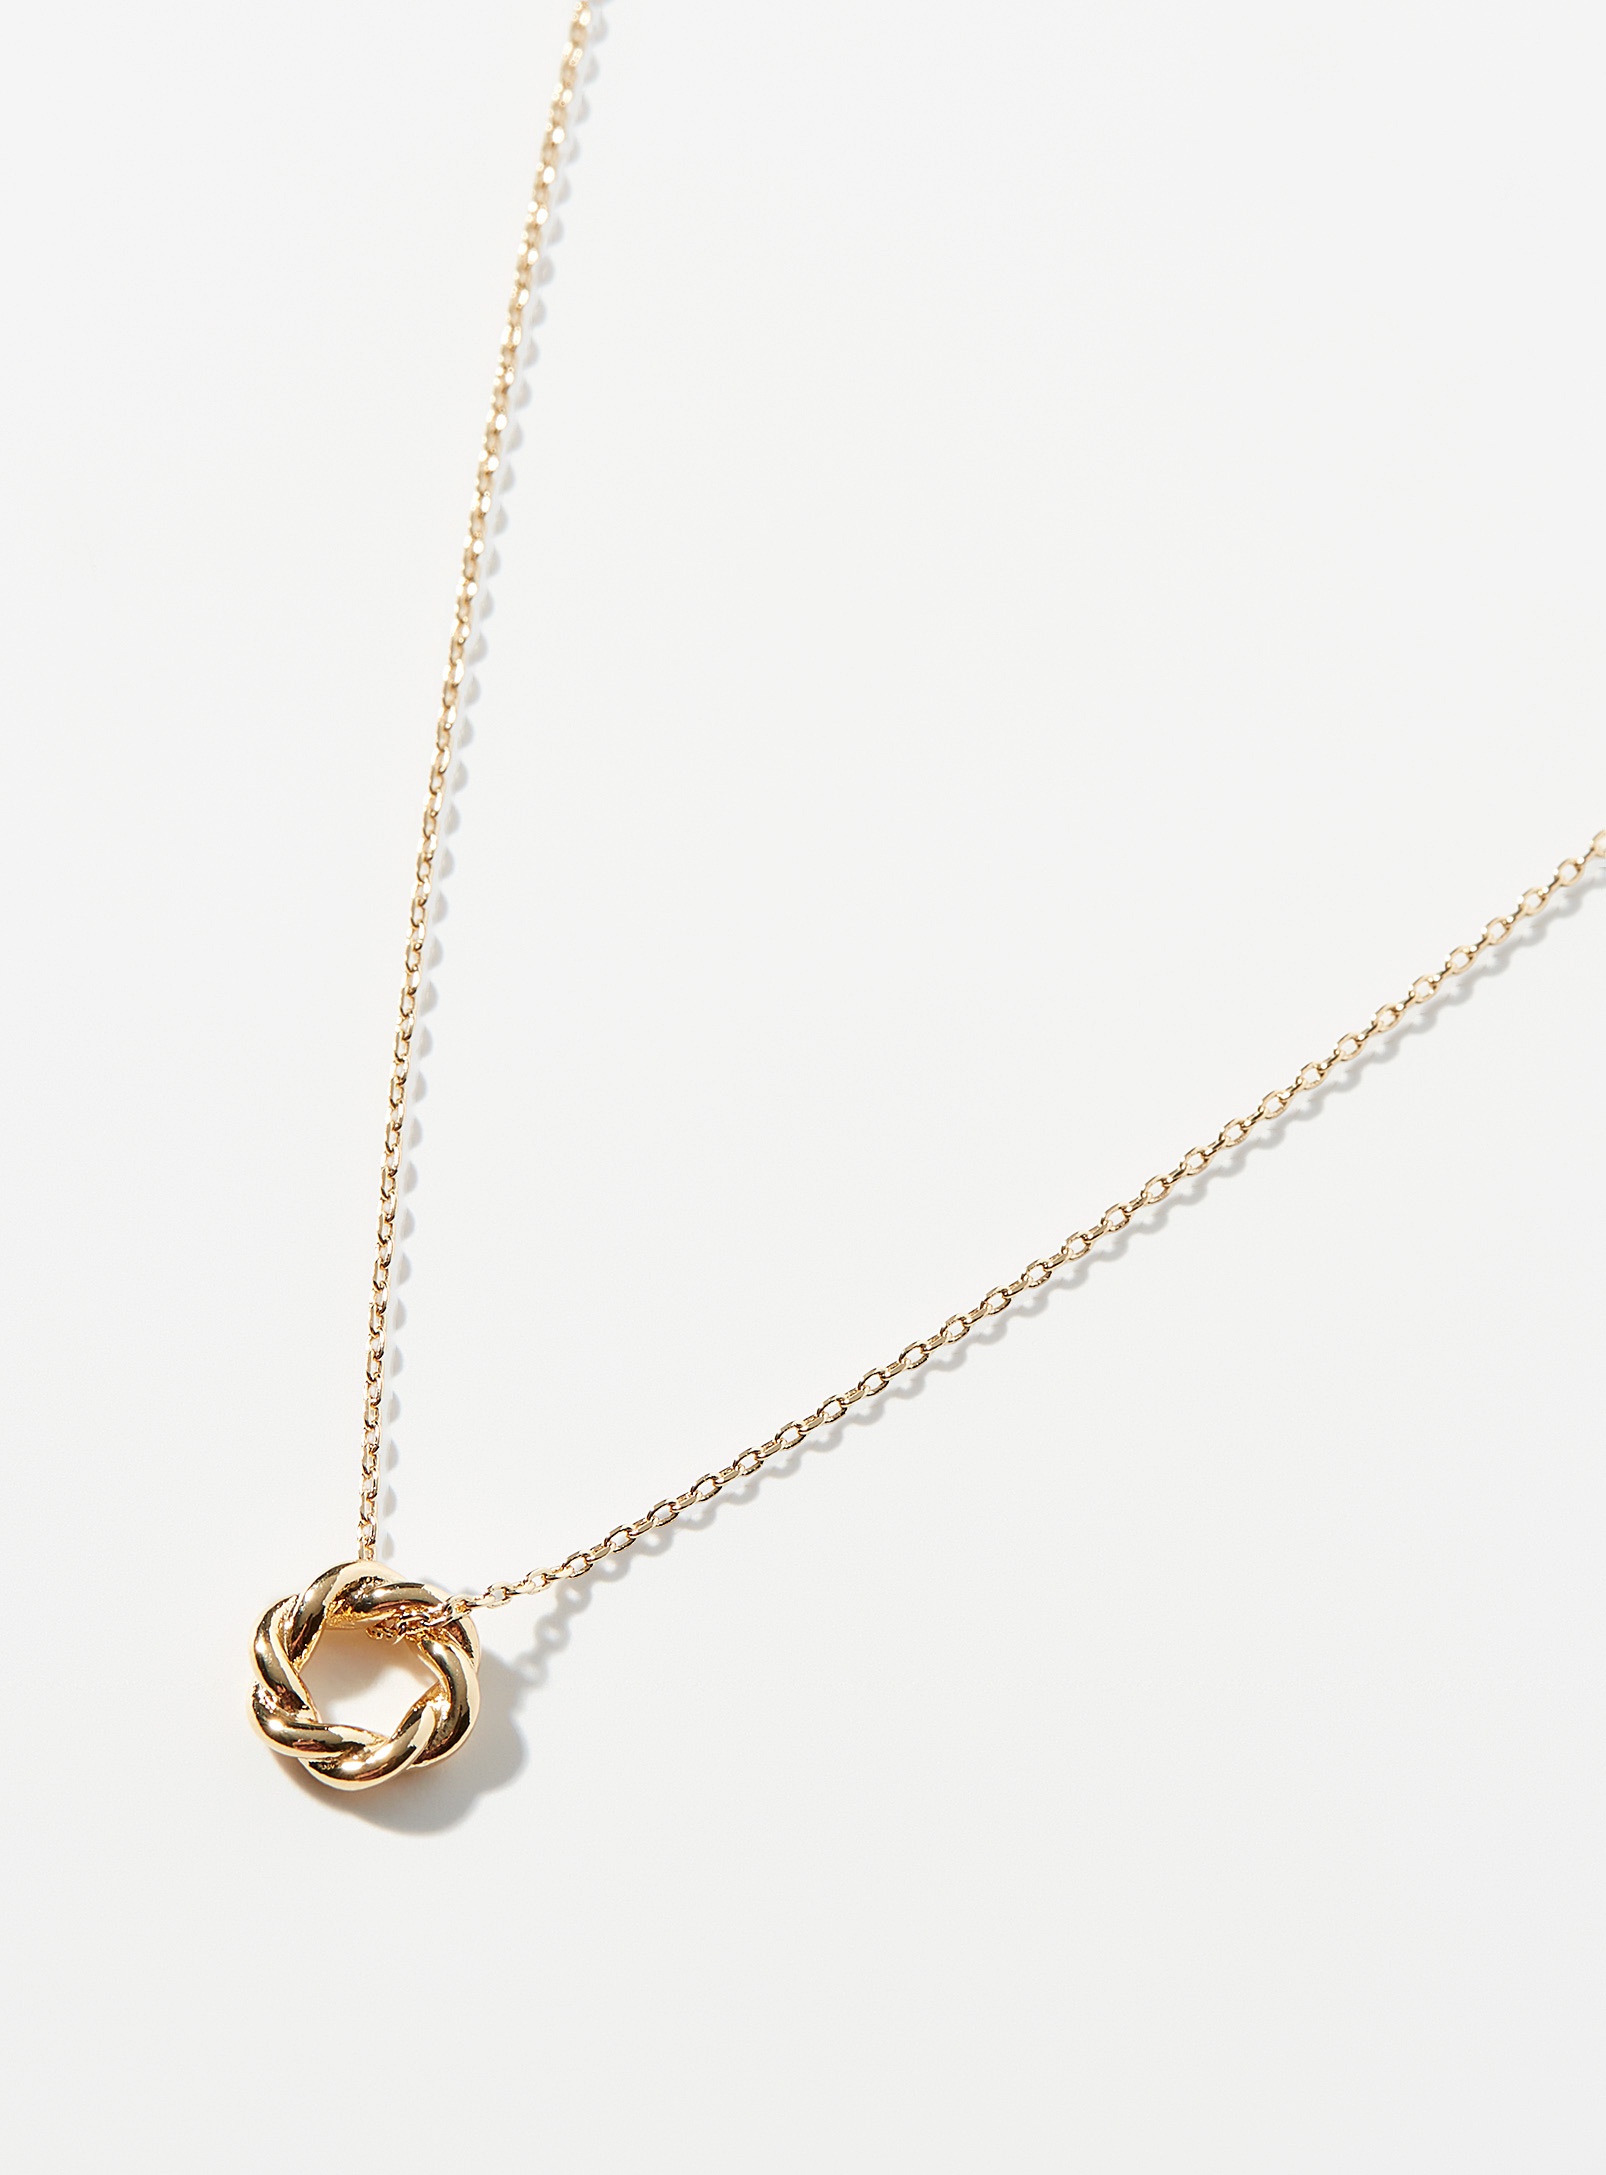 Simons - Women's Twisted ring necklace